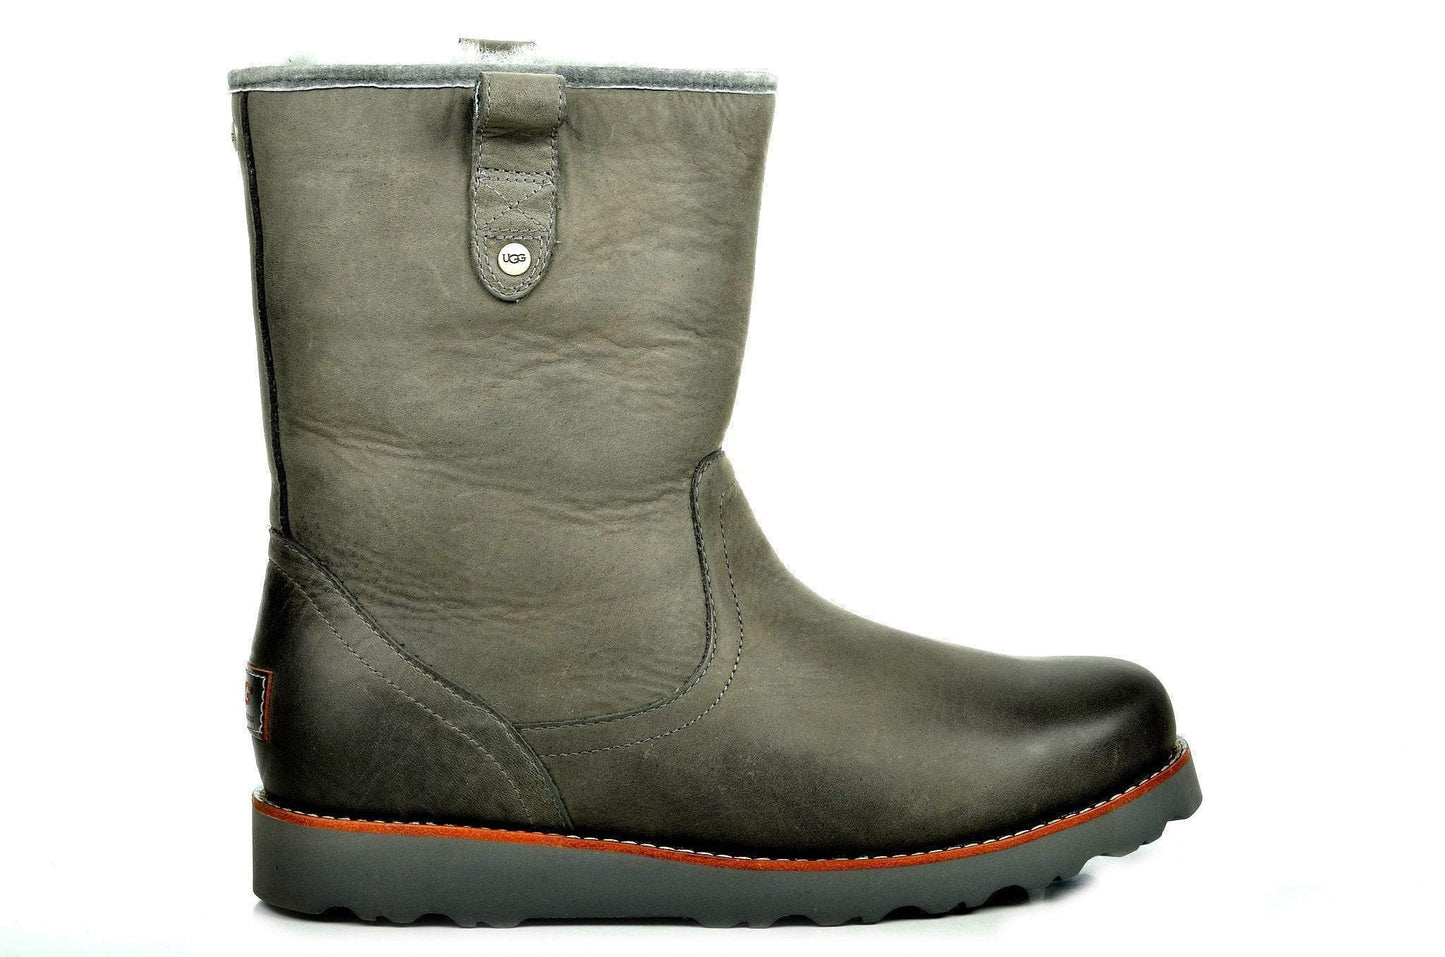 Bootland Boots Warm Grip Sole Boots 2 Colors